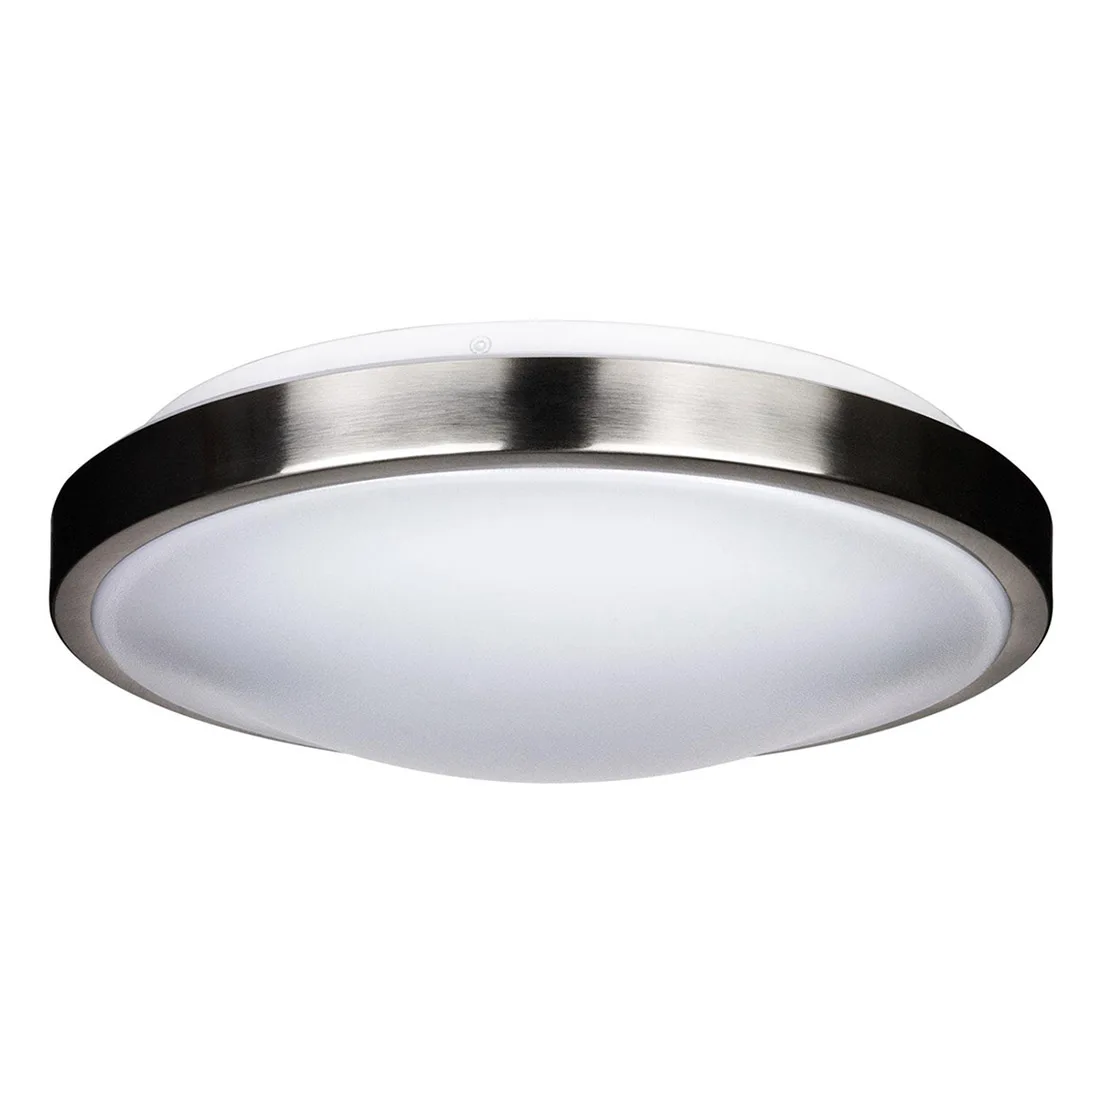 14-Inch, Sunlite LED Ceiling Light Fixture with Brushed Nickel Trim, 23 Watts, Dimmable, 30K - Warm White